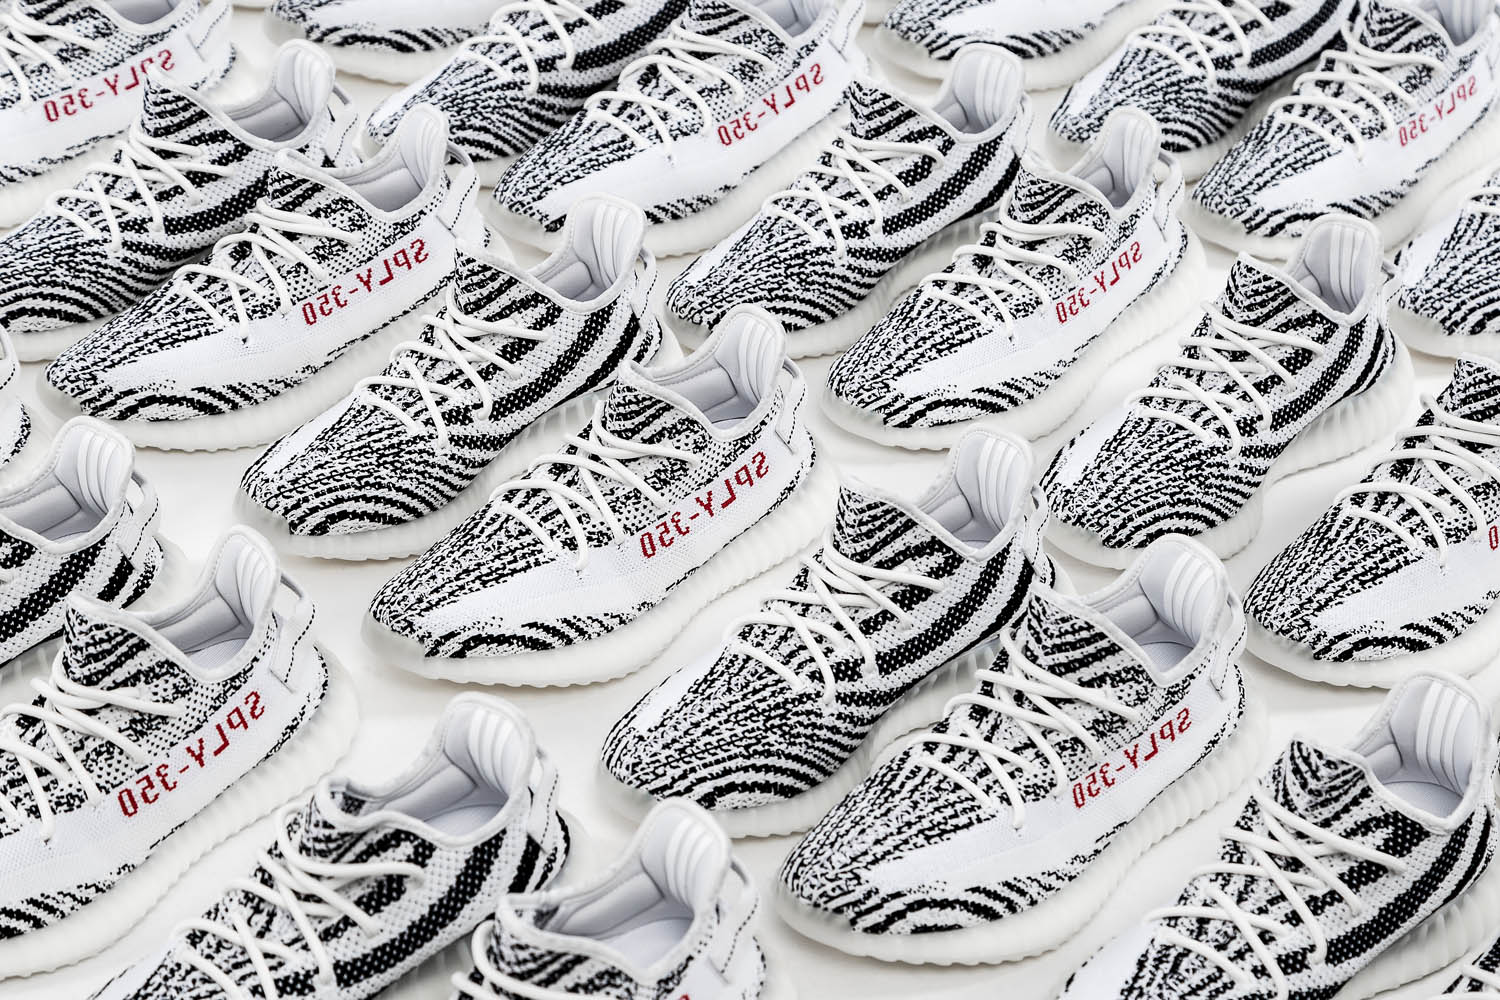 Vel gewoon atoom adidas Originals YEEZY BOOST 350 V2 "Zebra" Raffle | HBX - Globally Curated  Fashion and Lifestyle by Hypebeast